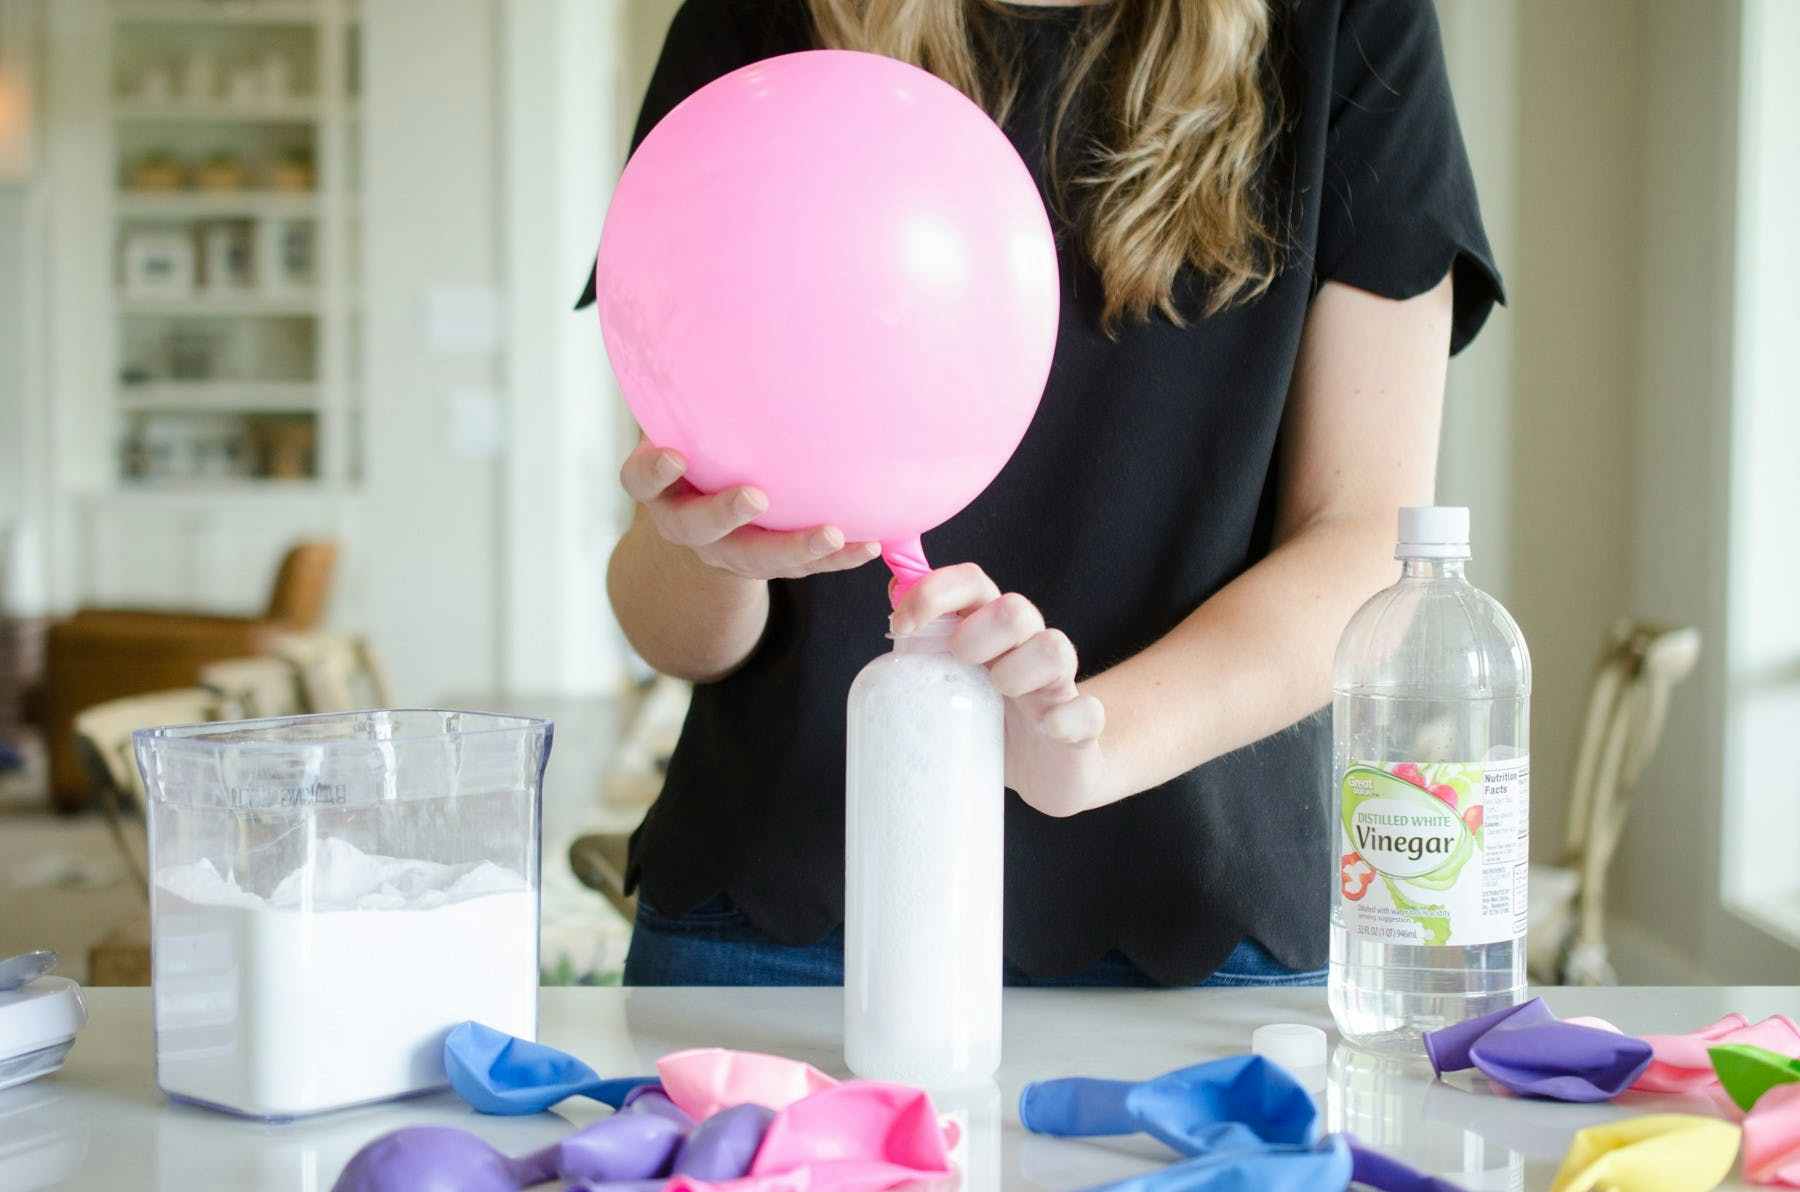 A balloon being inflated from the chemical reaction of vinegar and baking soda